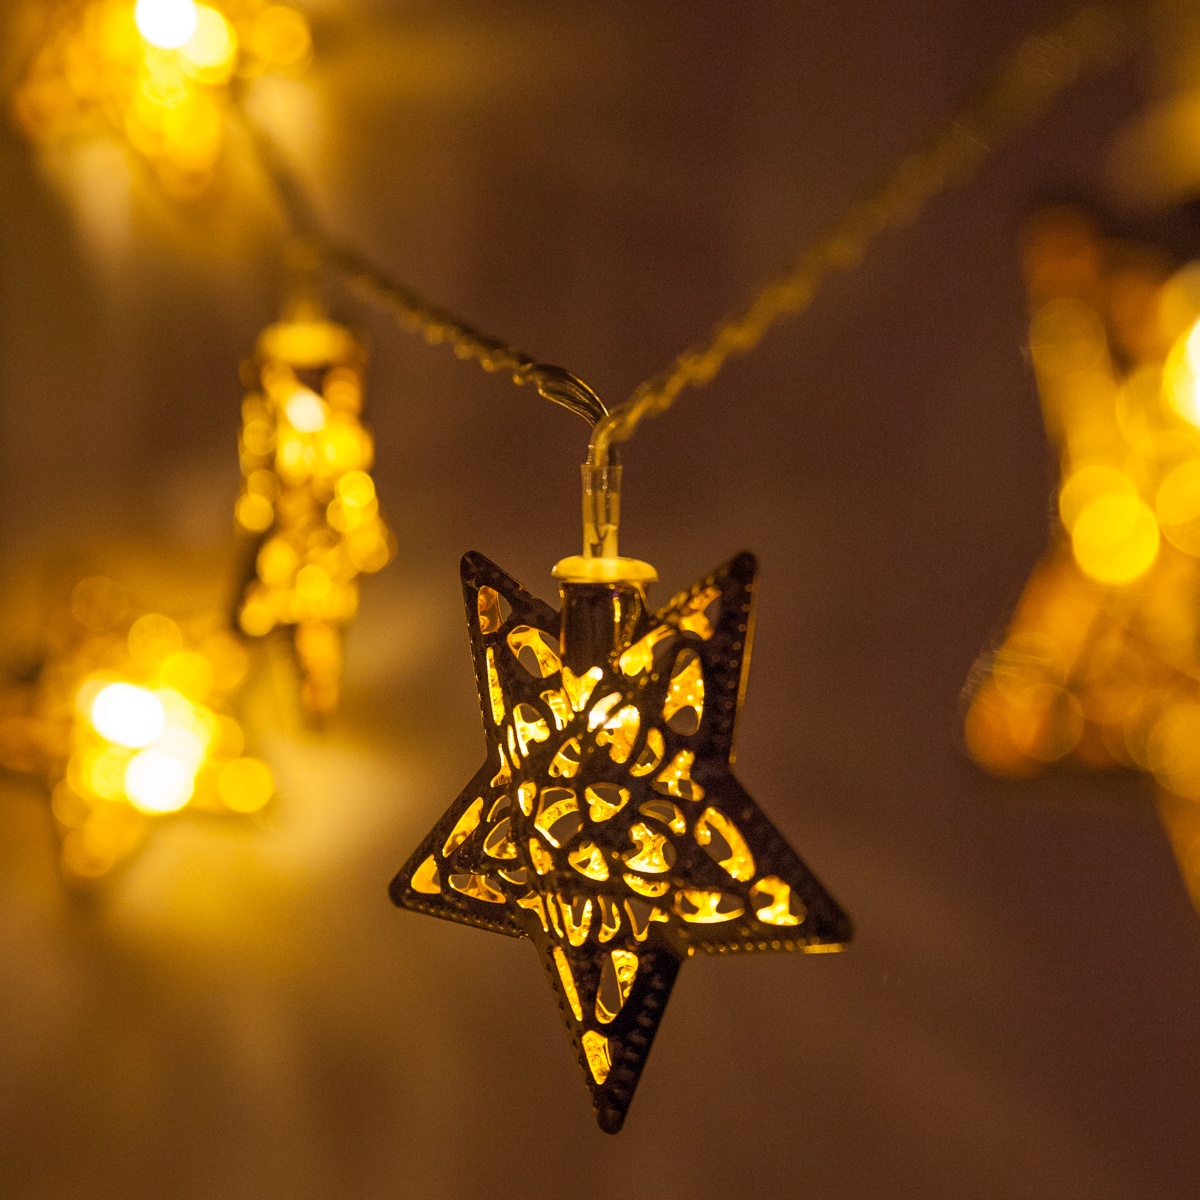 https://wintergreencorp.com/images/pz/52449/01-LED-battery-operated-gold-metal-star-lights-7352.jpg